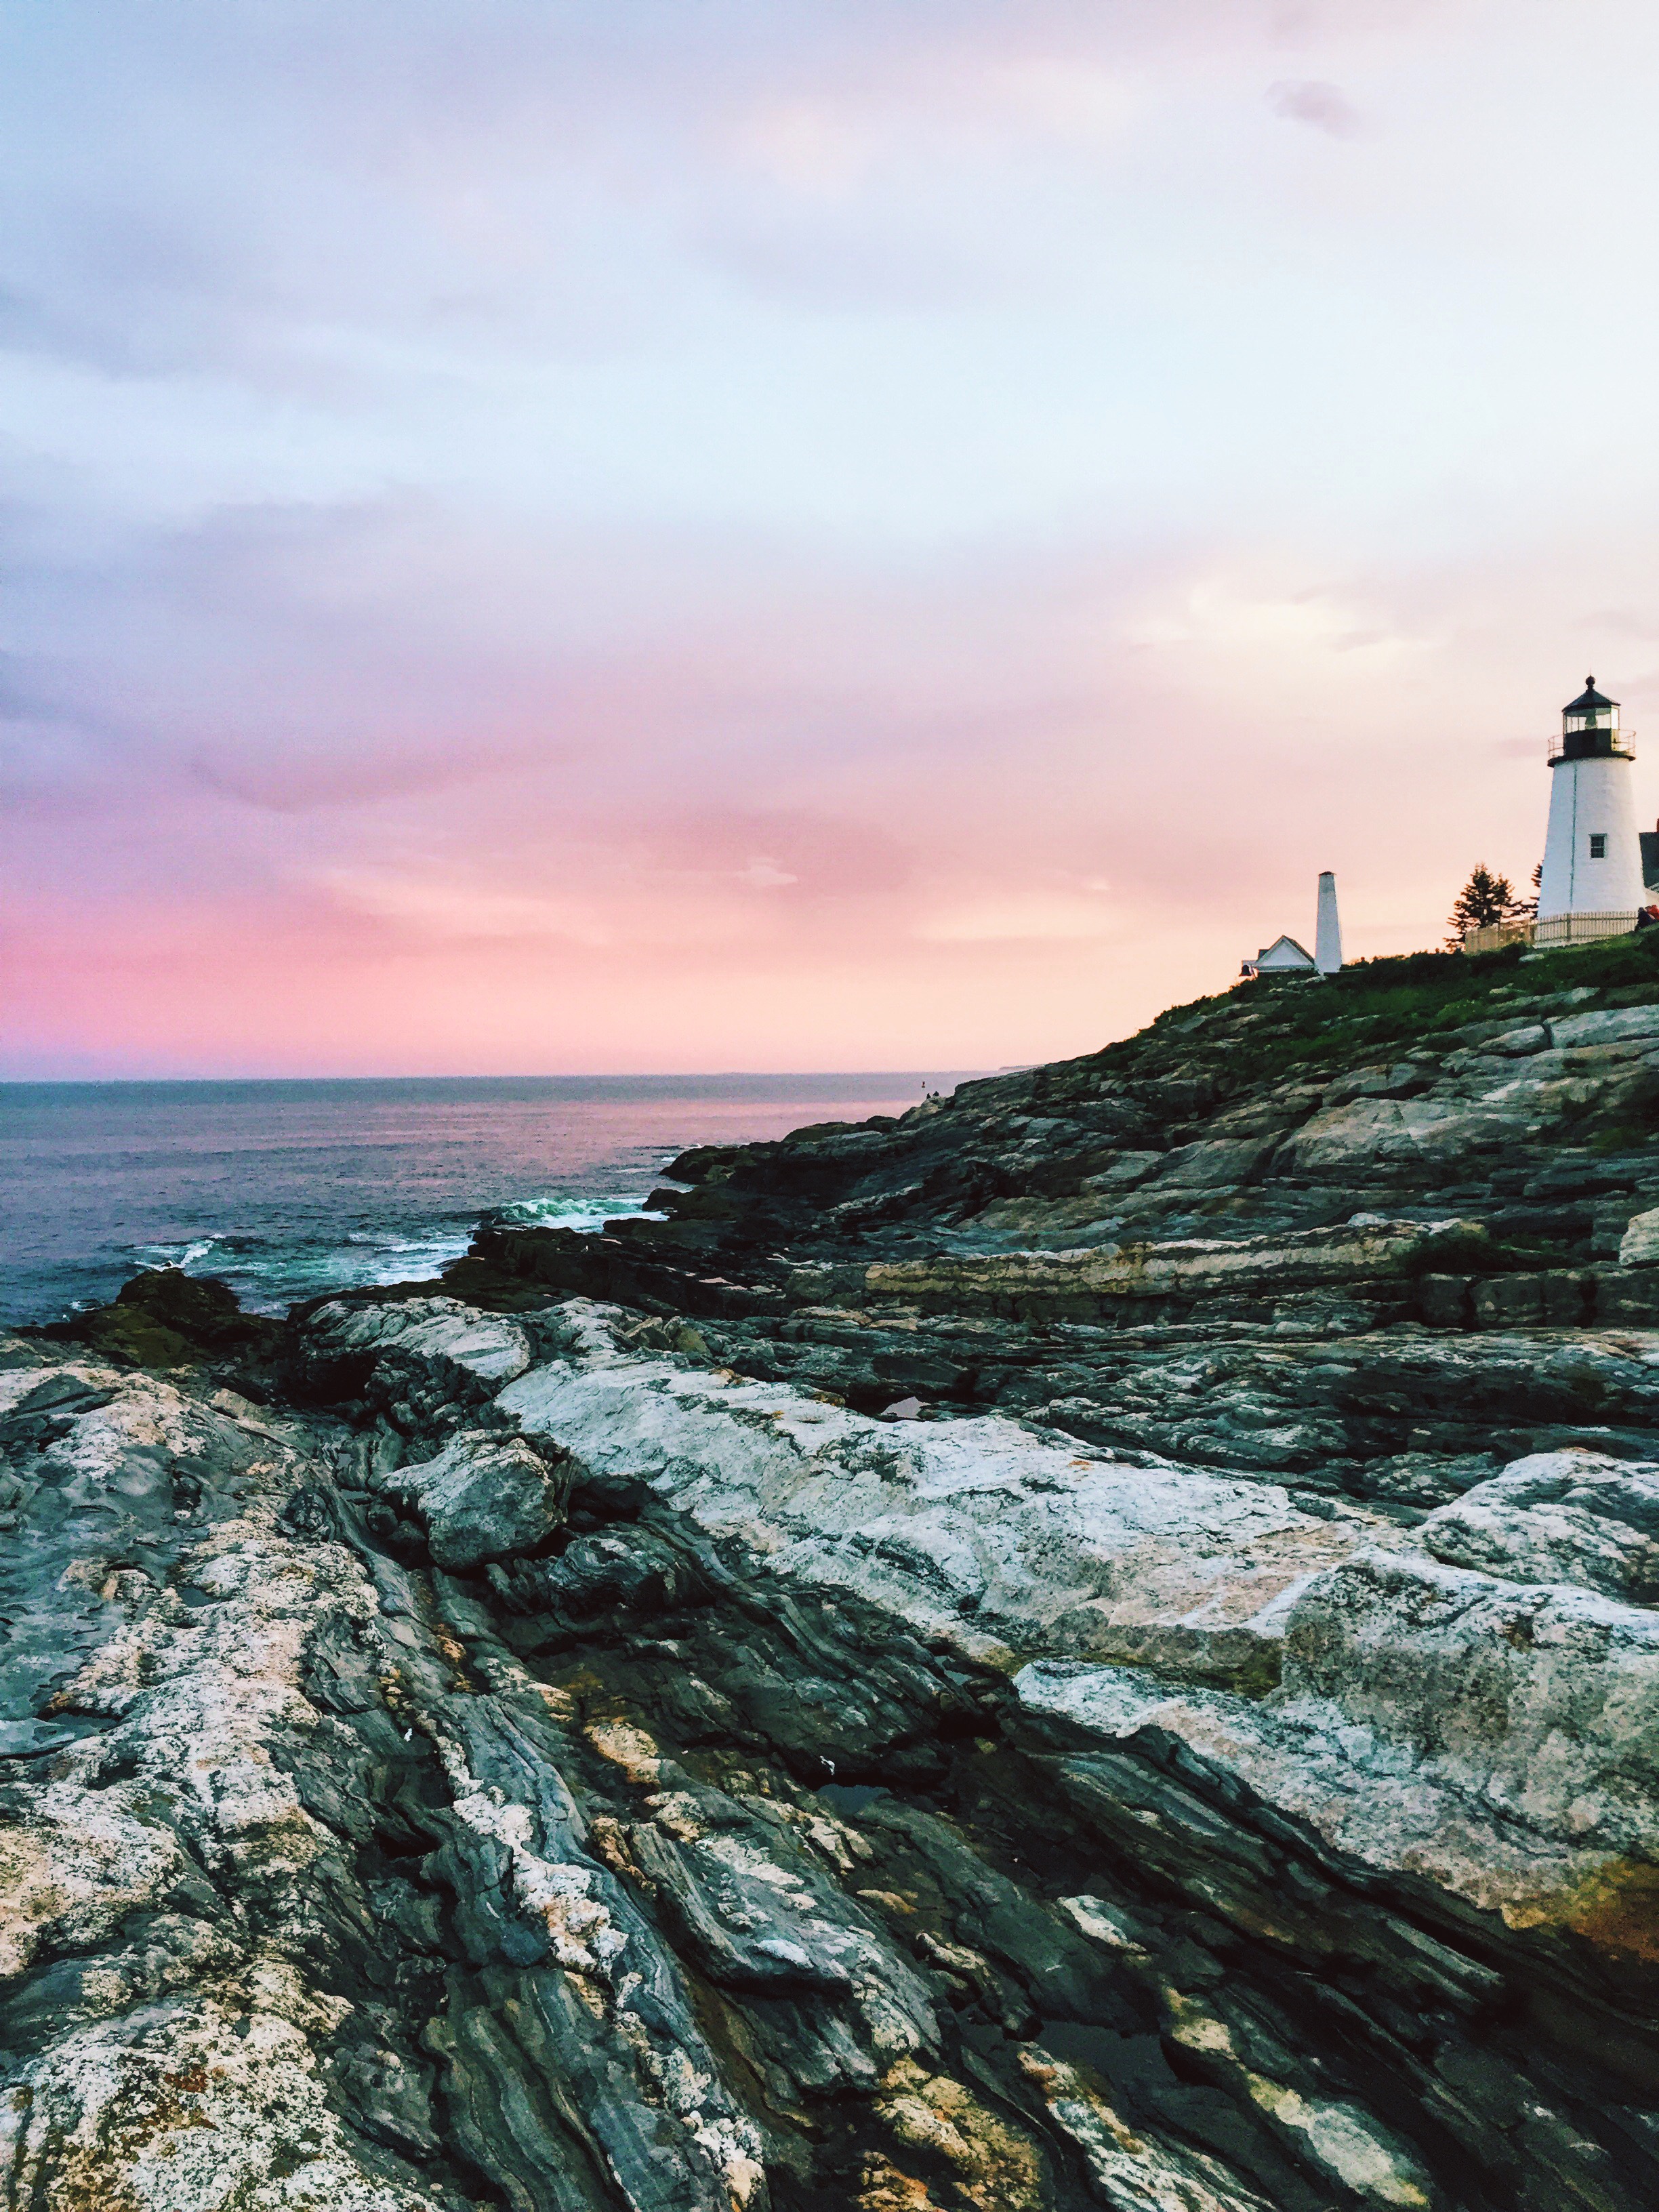 Best Places to Stay in Maine | Best Hotels on the Coast of Maine | Where to stay in the coastal towns of Maine | Travel Guide to the coast of Maine | How to Experience Maine | Camden, Rockport, Rockland, Portland, Kennebunkport, Maine | Best of Maine via Travel Blogger @elanaloo + elanaloo.com